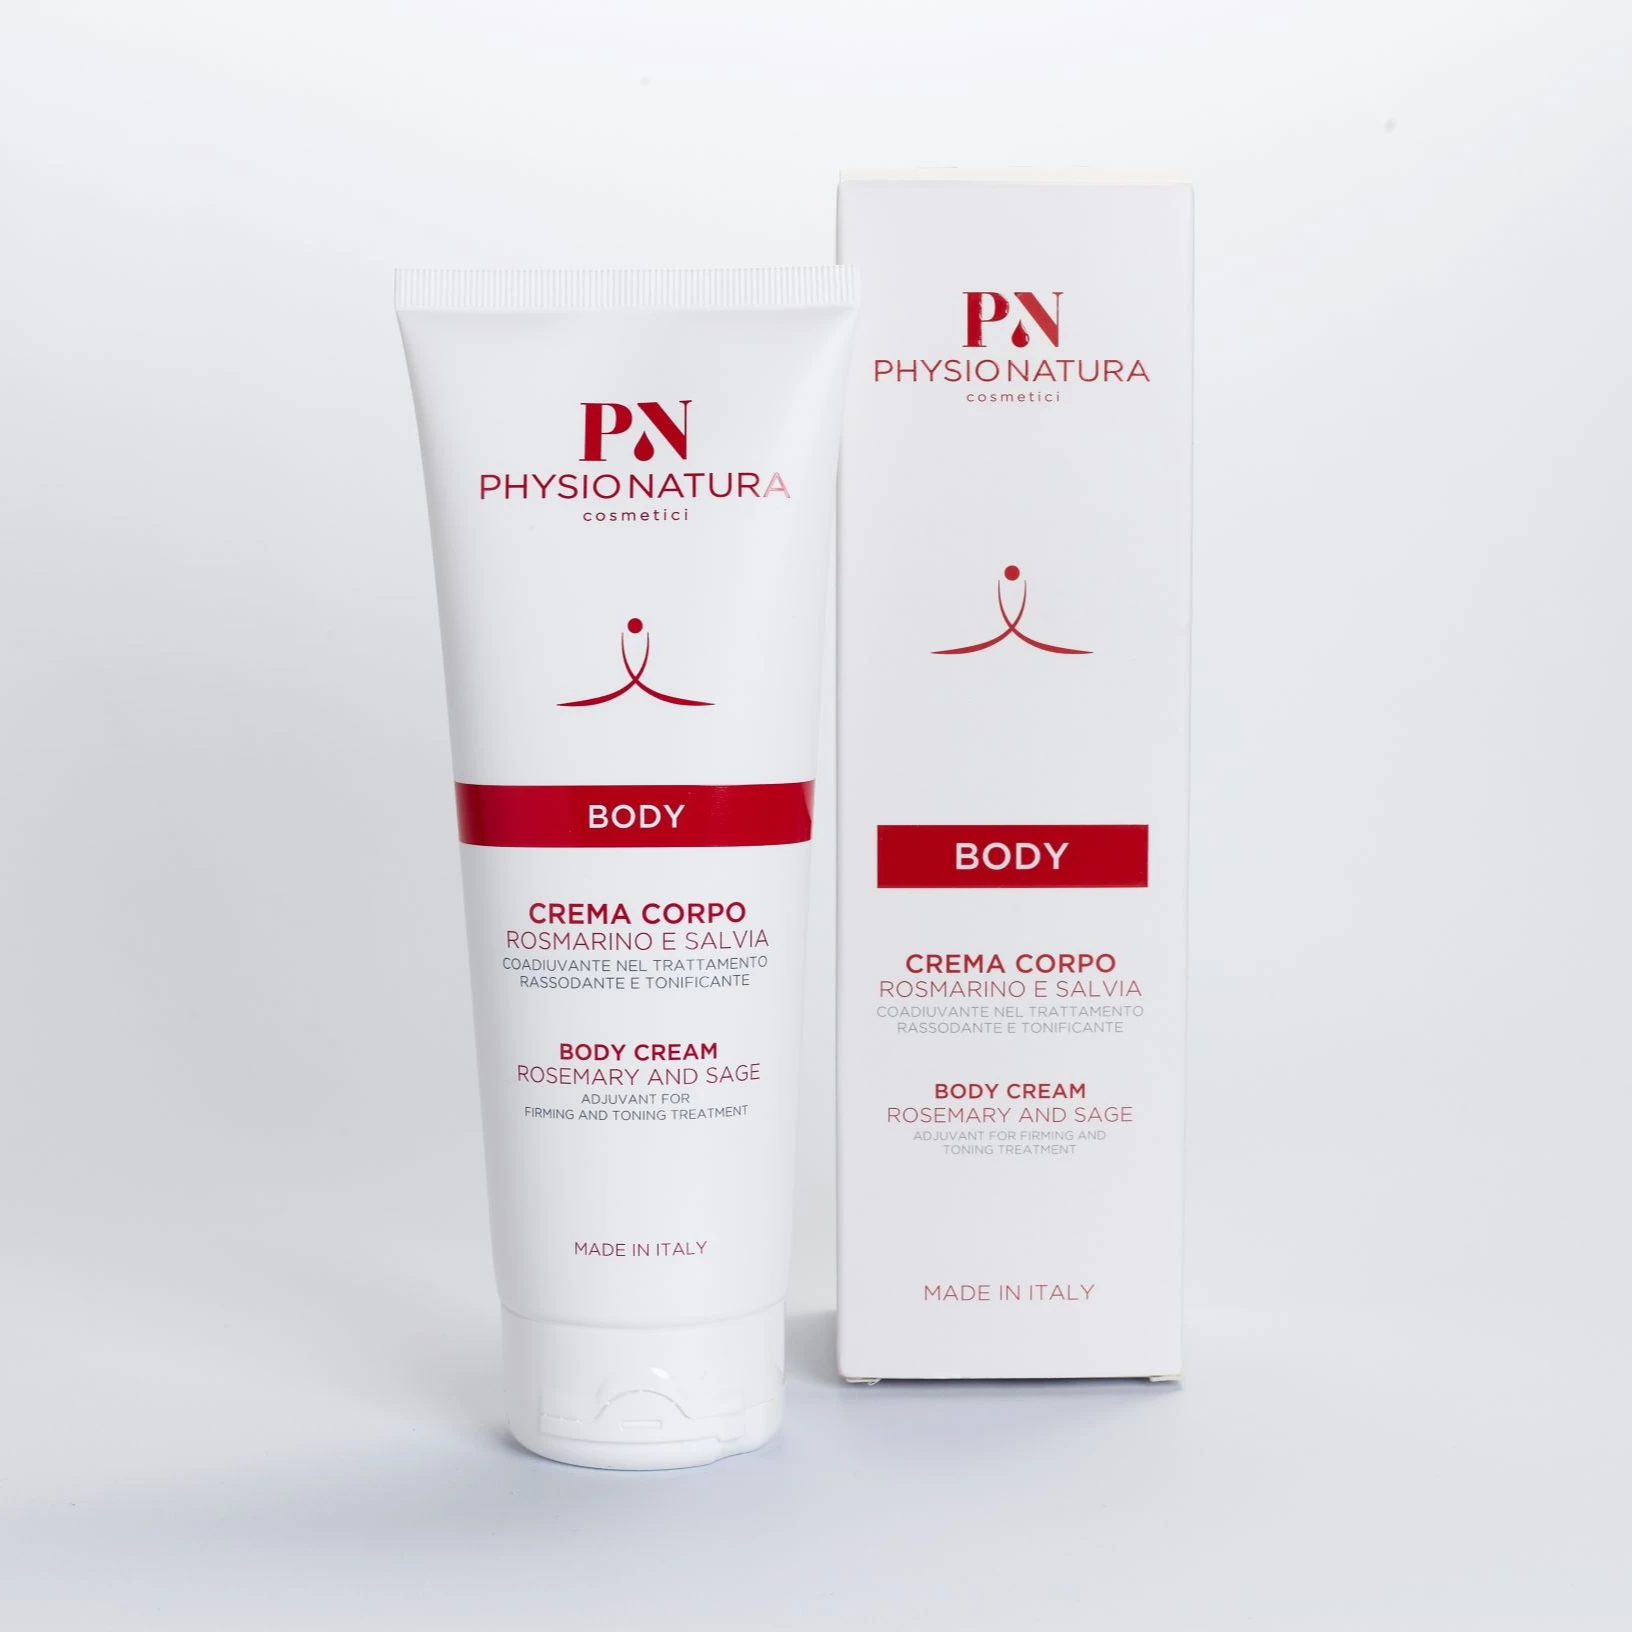 body cream anti cellulite reactivating circulation made in italy